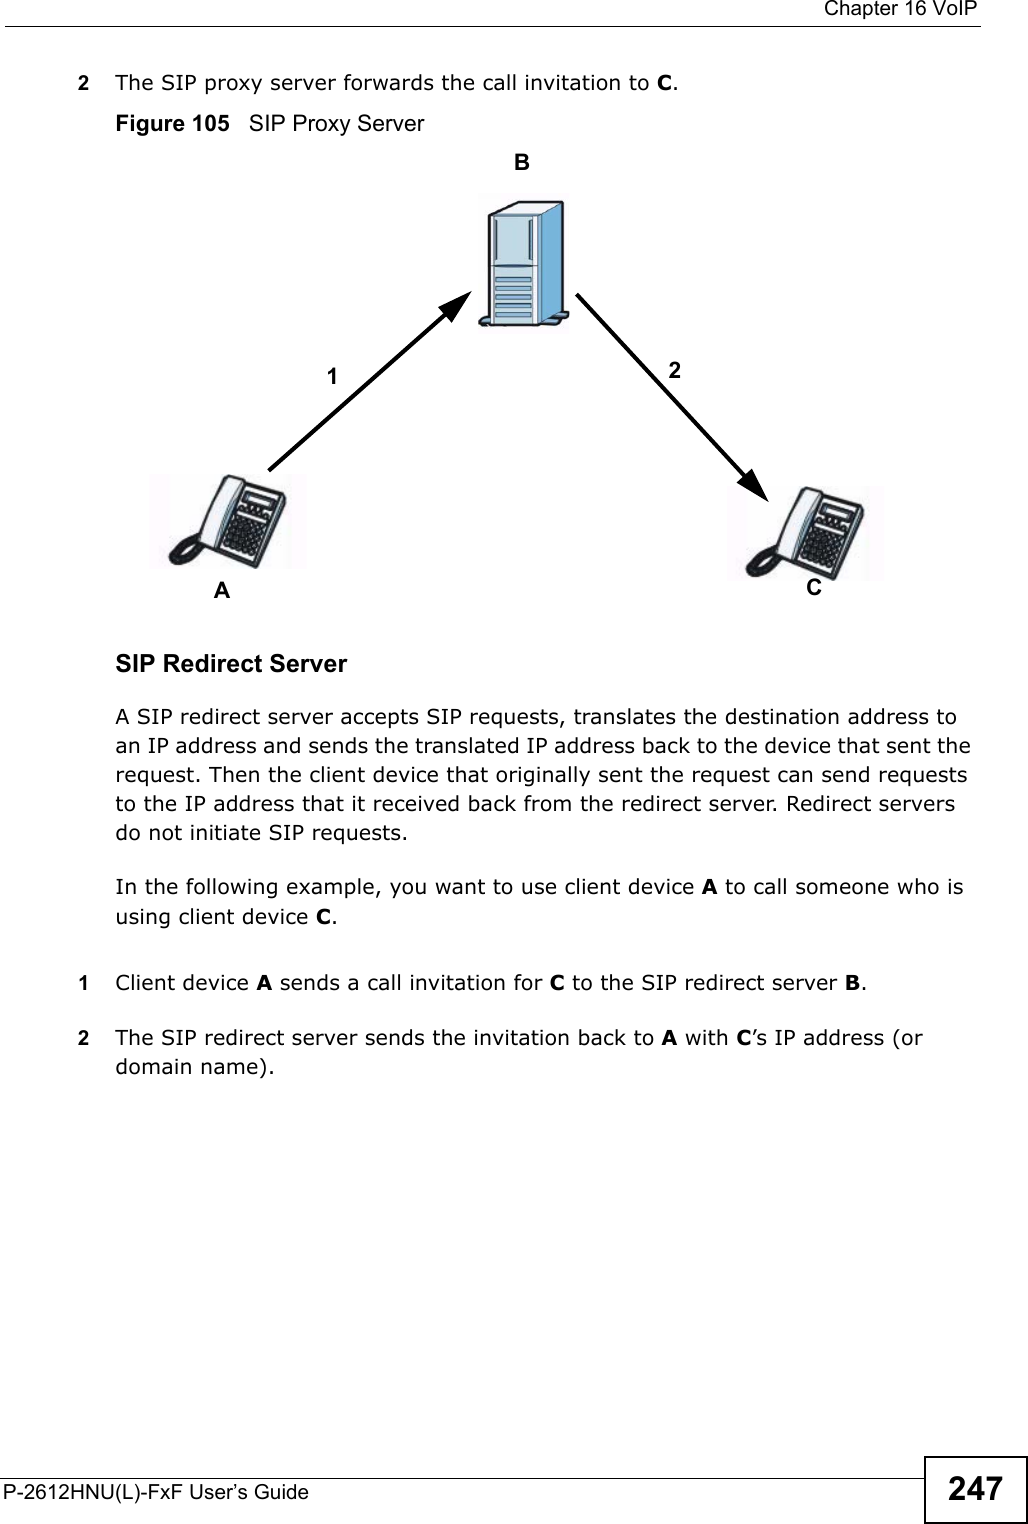  Chapter 16 VoIPP-2612HNU(L)-FxF User’s Guide 2472The SIP proxy server forwards the call invitation to C.Figure 105   SIP Proxy ServerSIP Redirect ServerA SIP redirect server accepts SIP requests, translates the destination address to an IP address and sends the translated IP address back to the device that sent the request. Then the client device that originally sent the request can send requests to the IP address that it received back from the redirect server. Redirect servers do not initiate SIP requests. In the following example, you want to use client device Ato call someone who is using client device C. 1Client device Asends a call invitation for Cto the SIP redirect server B.2The SIP redirect server sends the invitation back to A with C’s IP address (ordomain name).BAC12